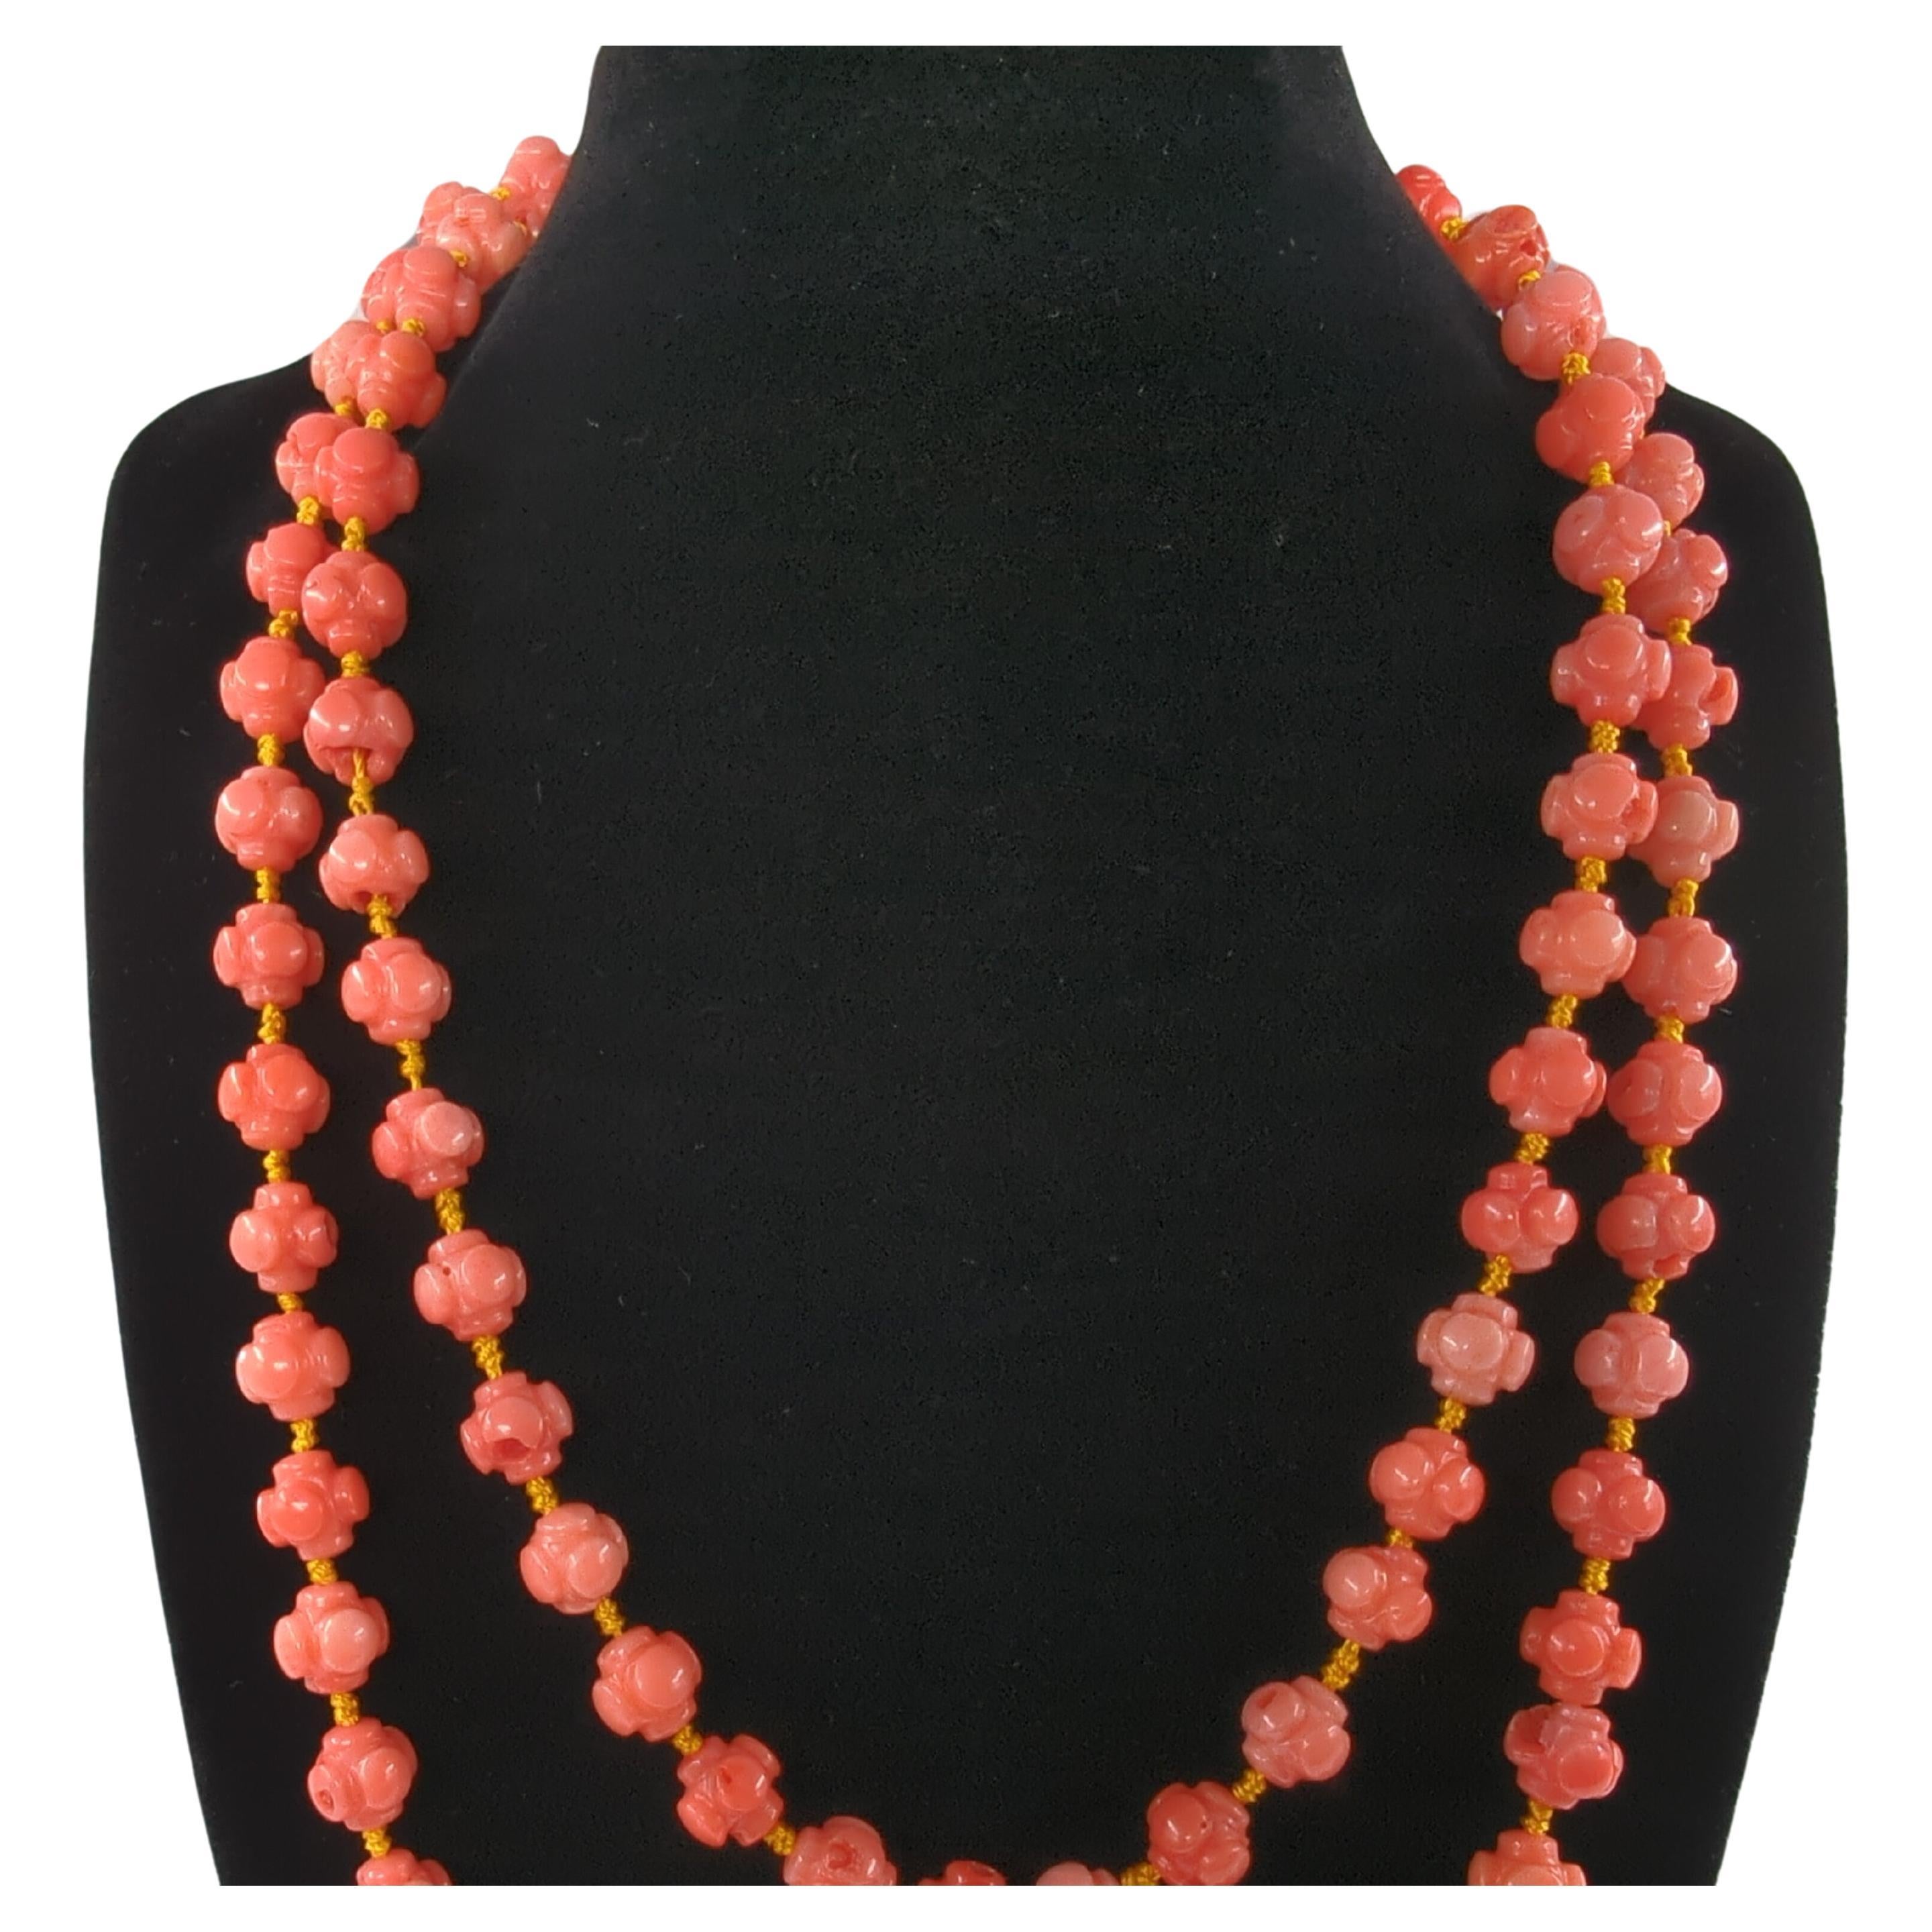 THIS ITEM CAN ONLY BE SHIPPED WITHIN CANADA, Canadian shipping address only please. Thanks and sorry for the inconvenience!

This exquisite strand of carved Chinese coral beads is a stunning testament to the art of gemstone craftsmanship. Comprising